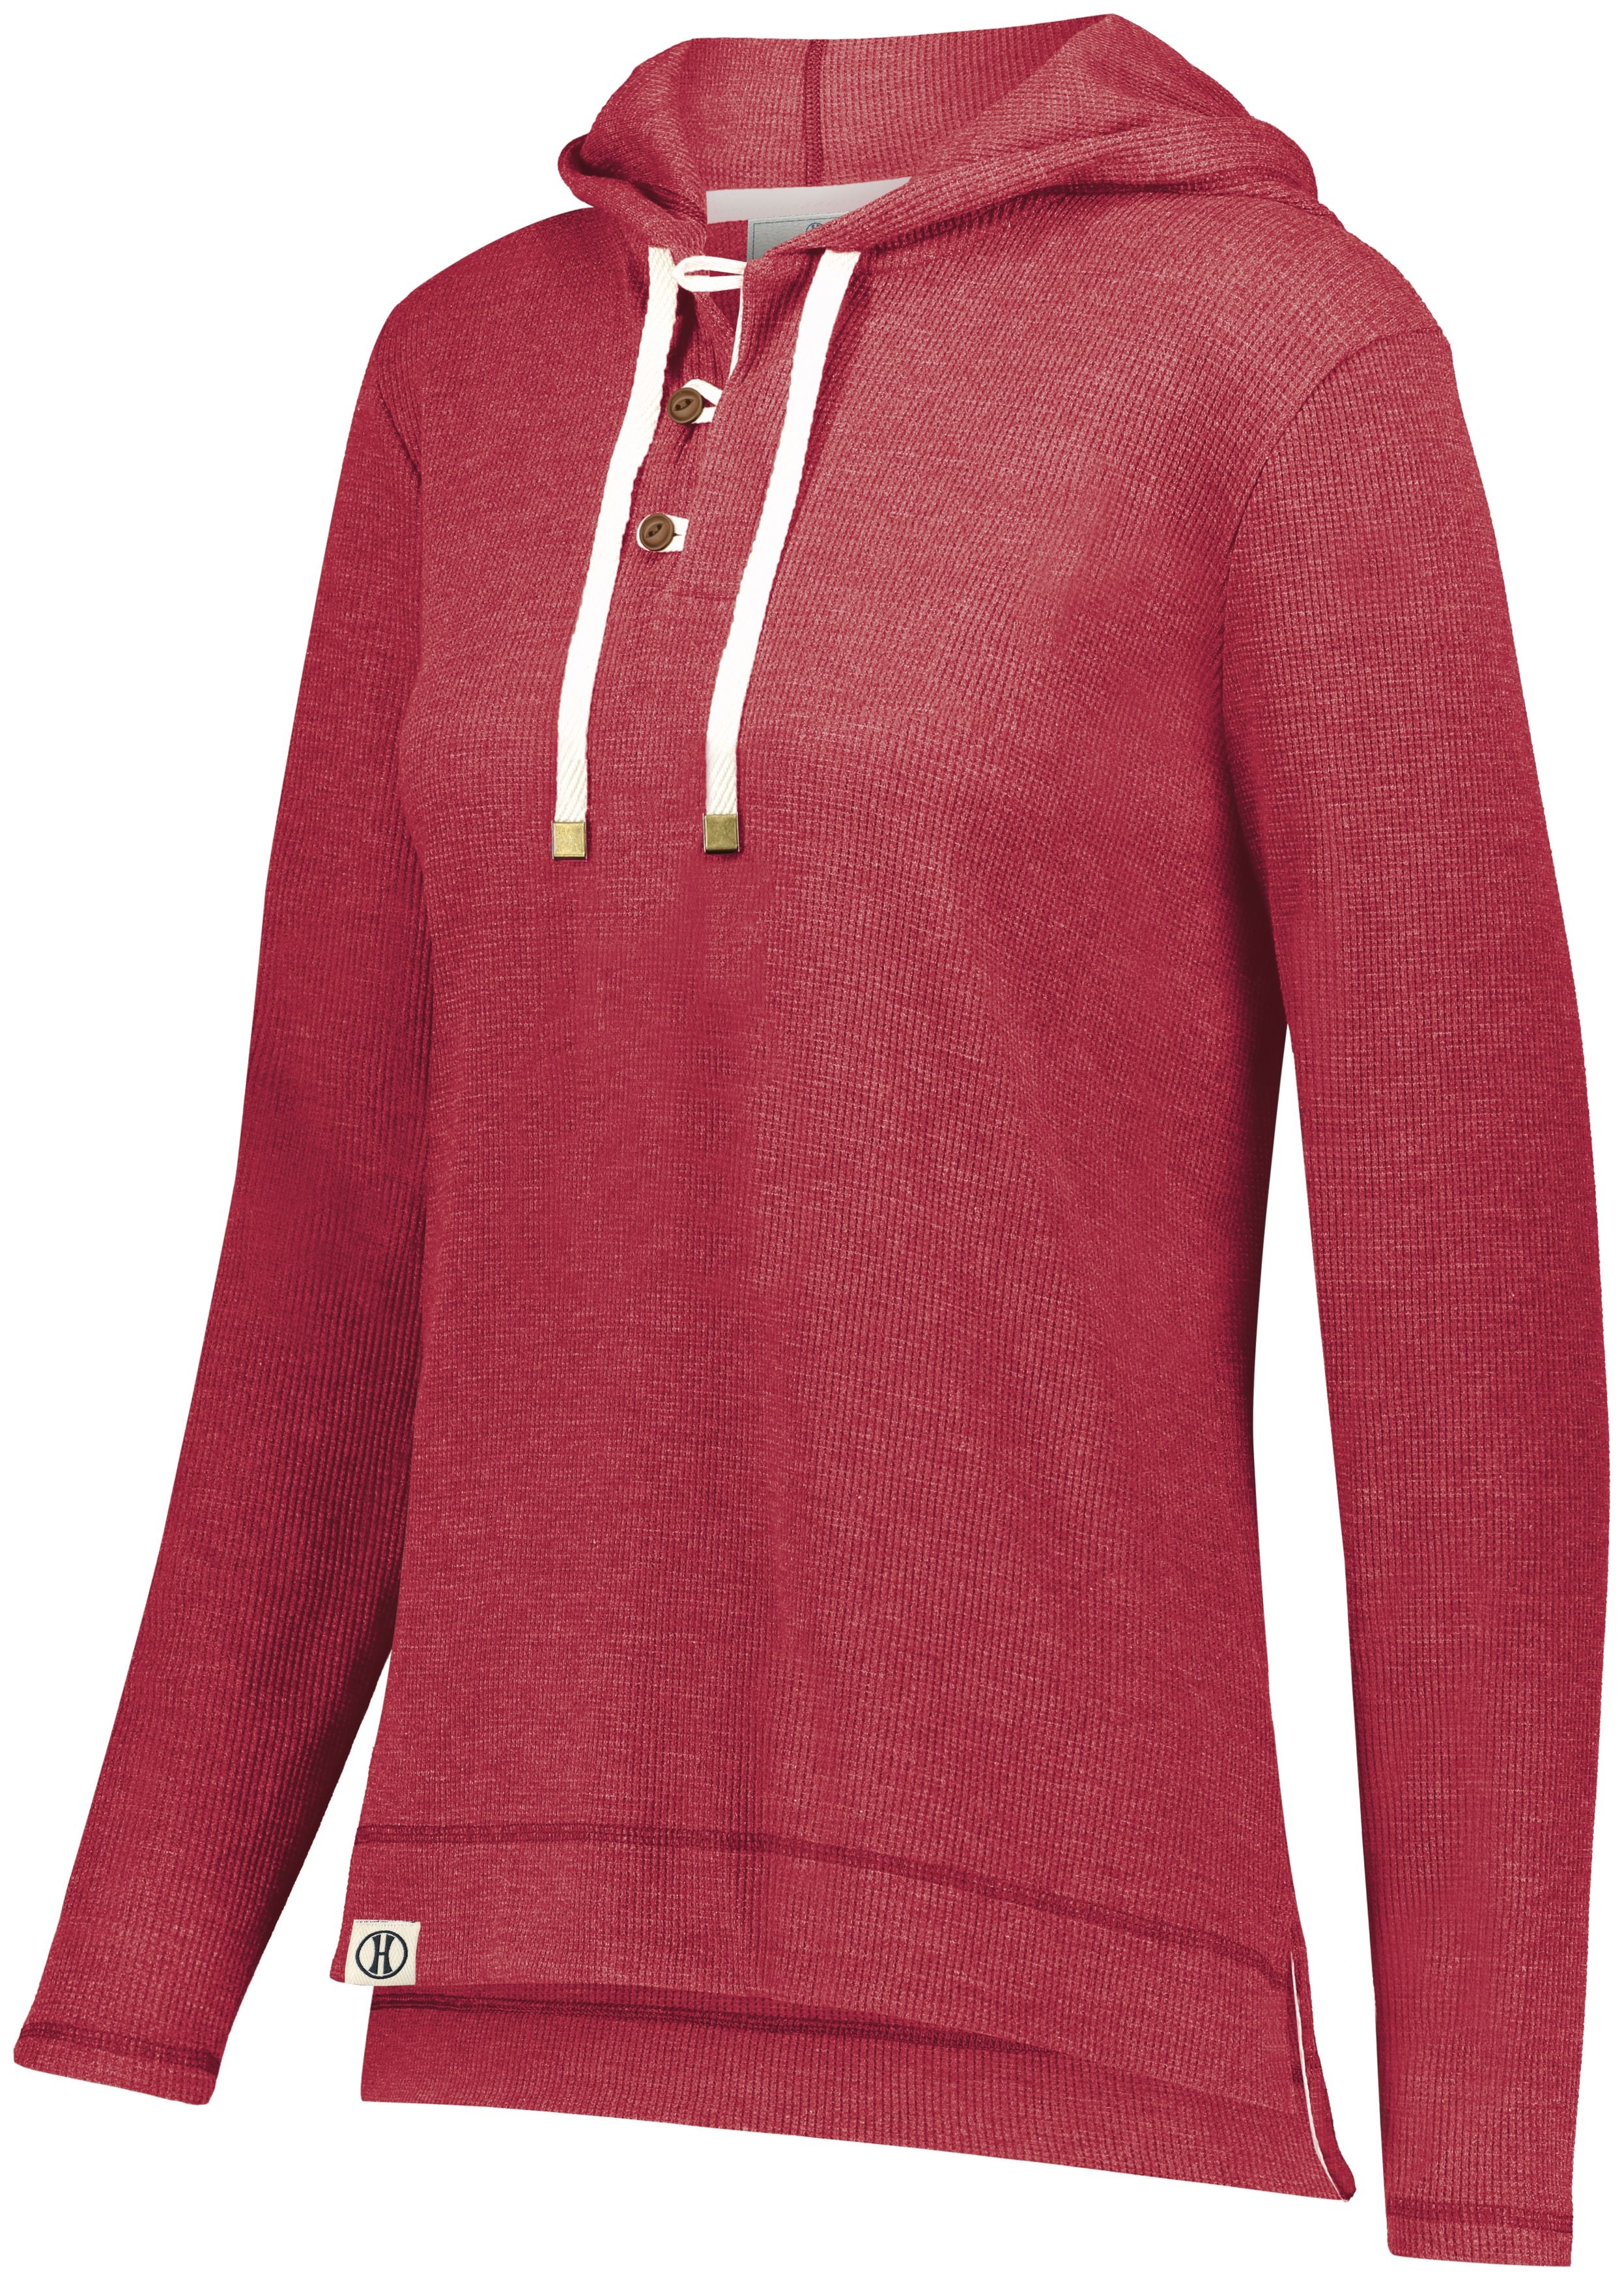 Holloway Ladies Coast Hoodie in Scarlet Heather  -Part of the Ladies, Holloway, Shirts product lines at KanaleyCreations.com